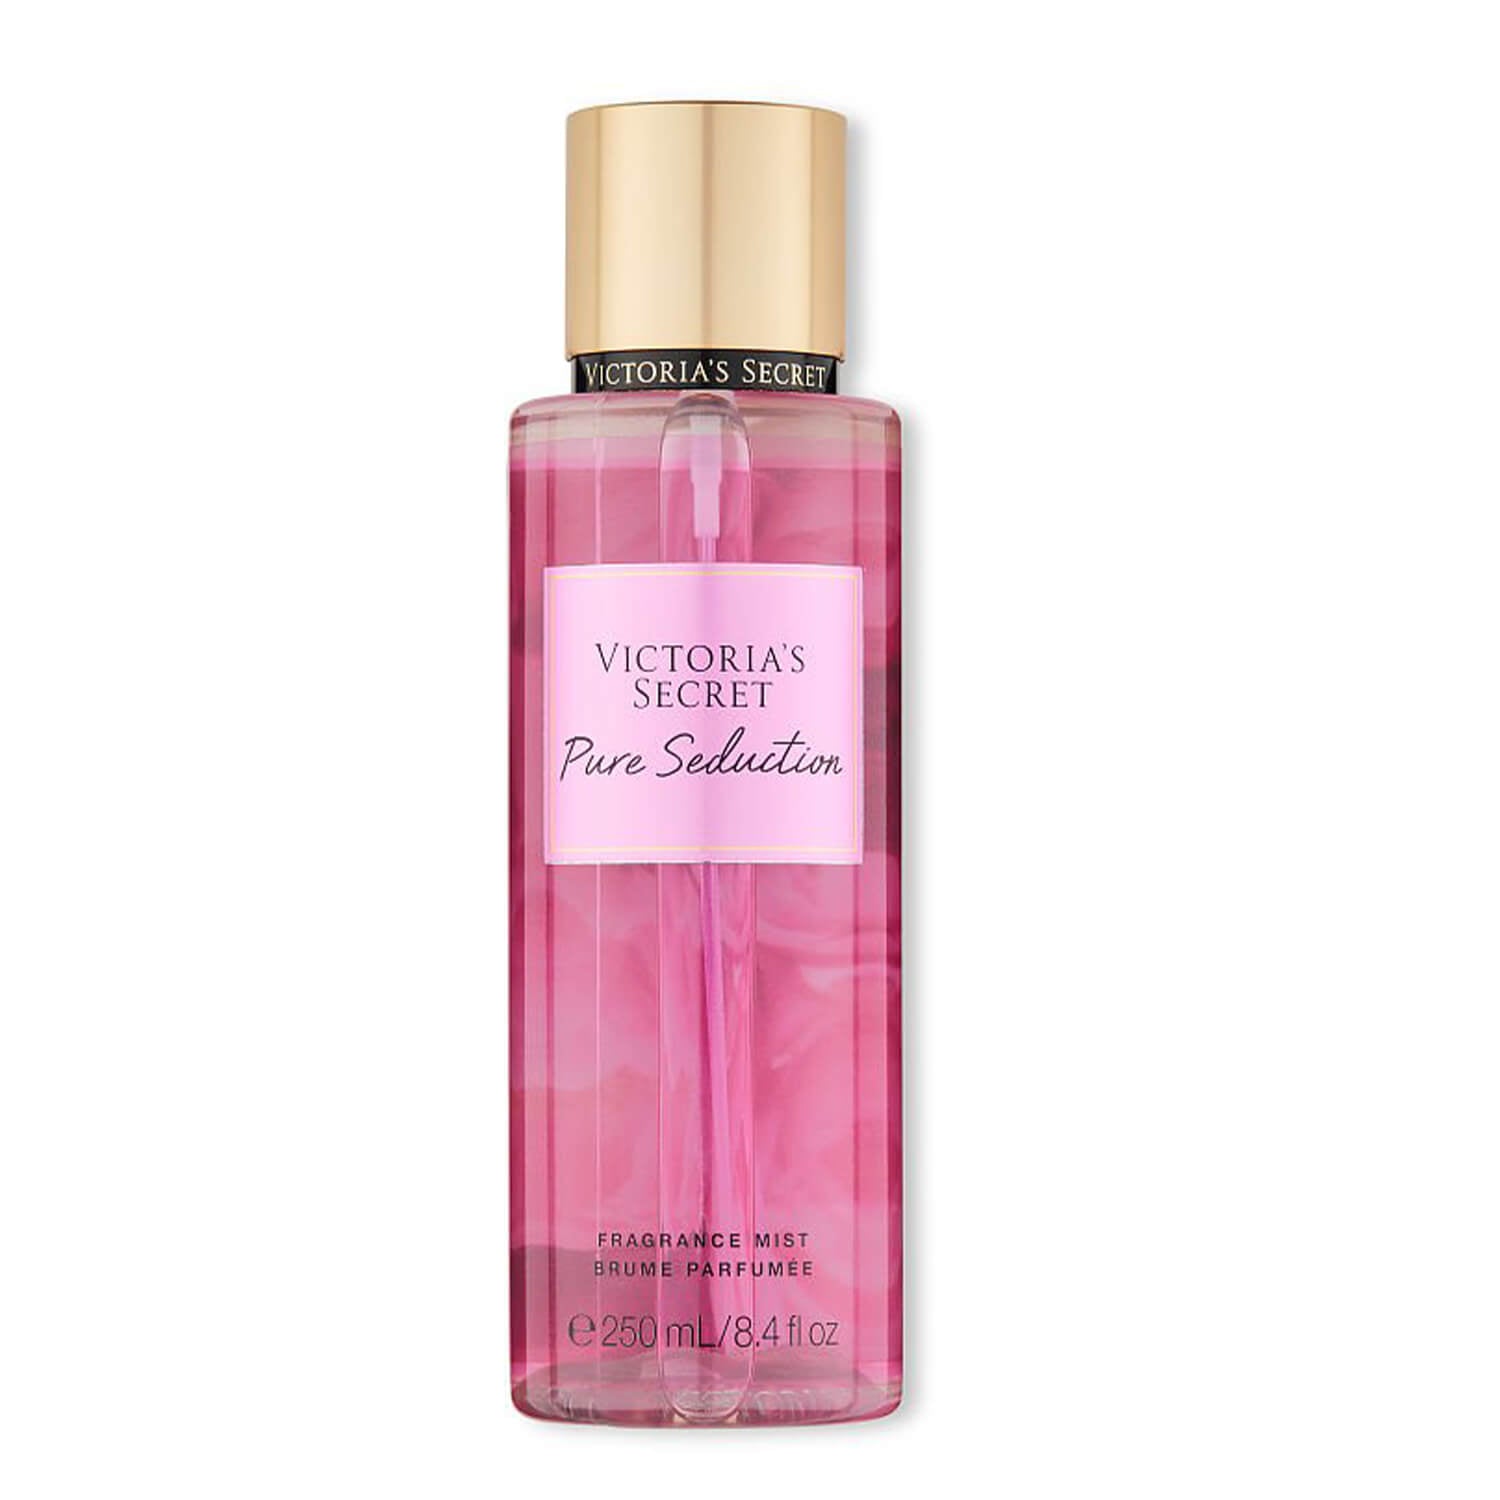 Shop 100%  original Victoria's Secret Fragrance Mist in Pure Seduction available at Heygirl.pk for delivery in Pakistan